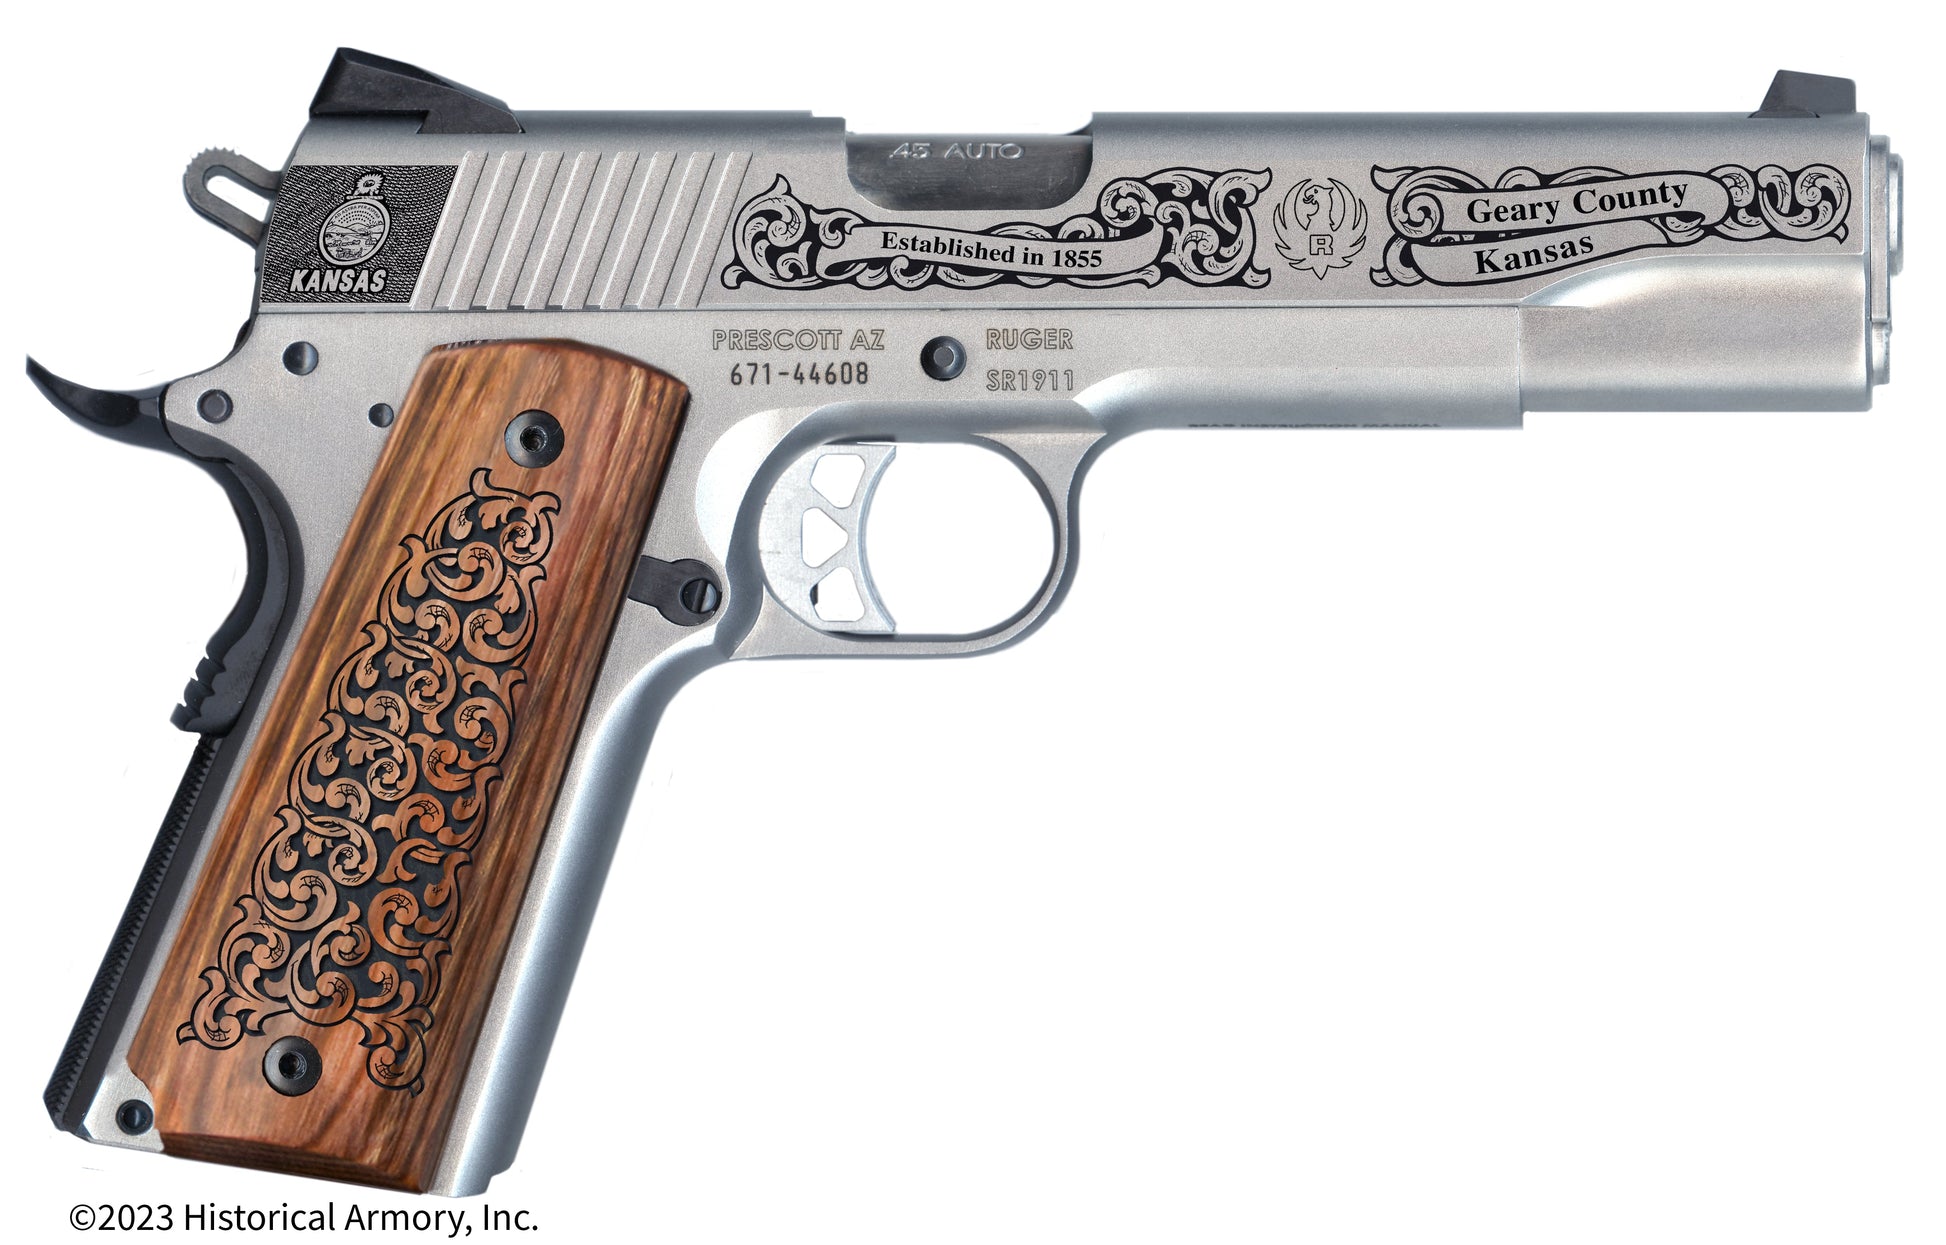 Geary County Kansas Engraved .45 Auto Ruger 1911